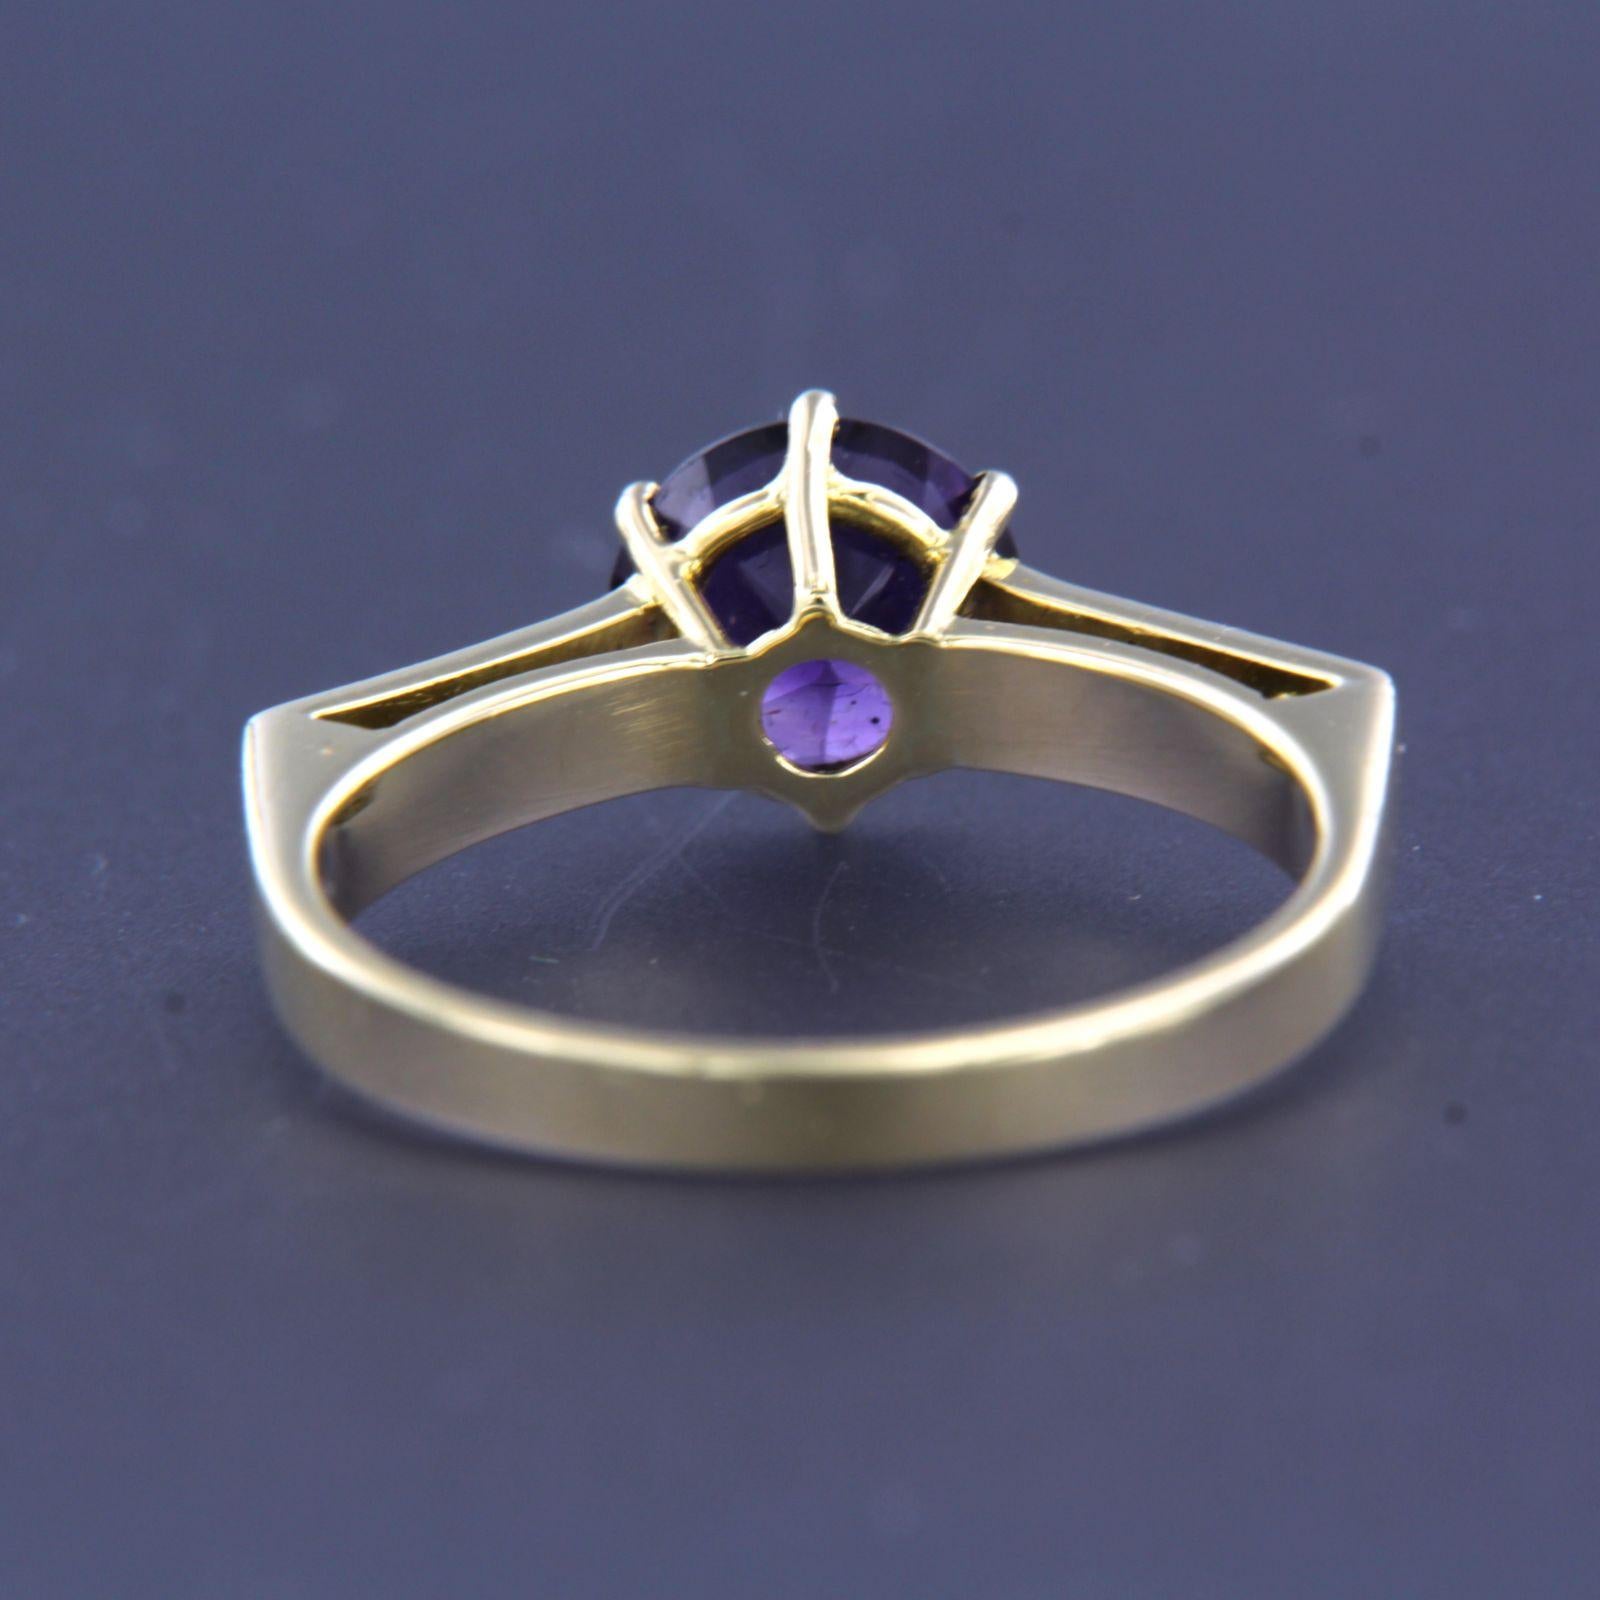 Brilliant Cut Ring with amethyst and diamonds 18k yellow gold For Sale